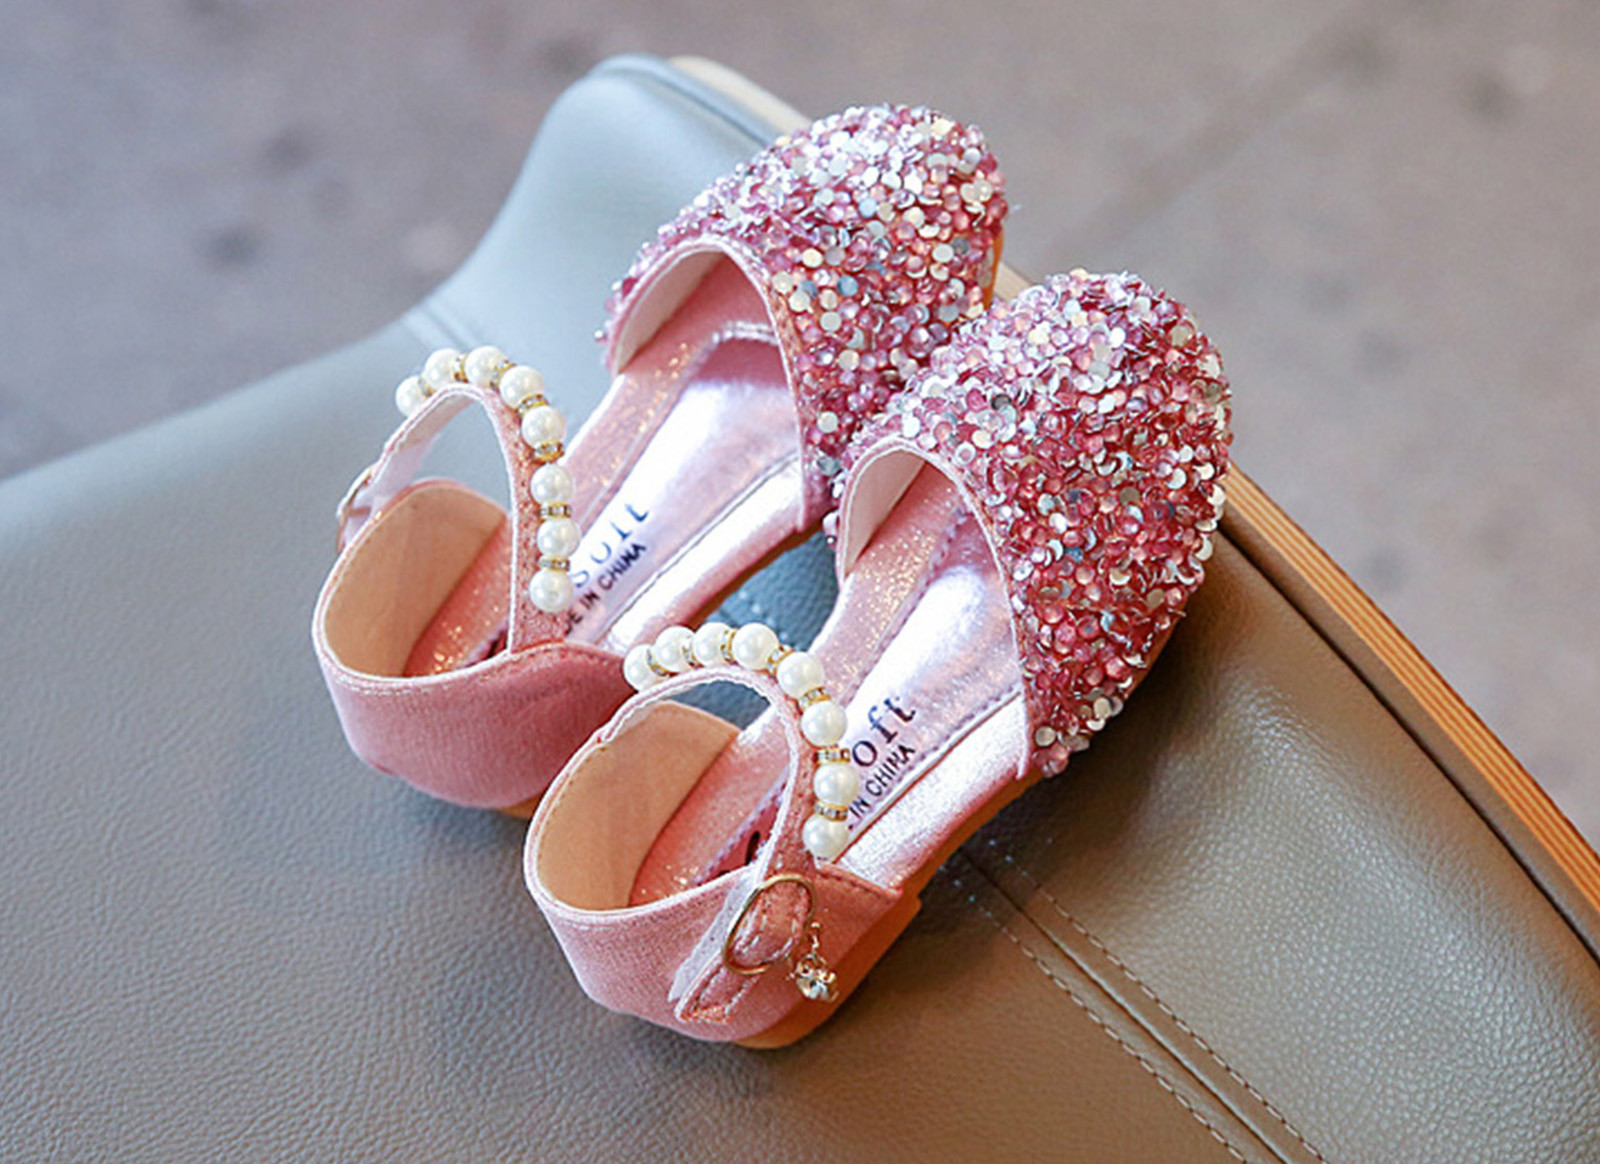 Cathalem Toddler Water Sandals Princess Pumps Dance Shoes Low Heels Rhinestone Sequins Girls Glitter Toddler Girls Jelly Sandals Sandal Pink 5 Years - image 1 of 4